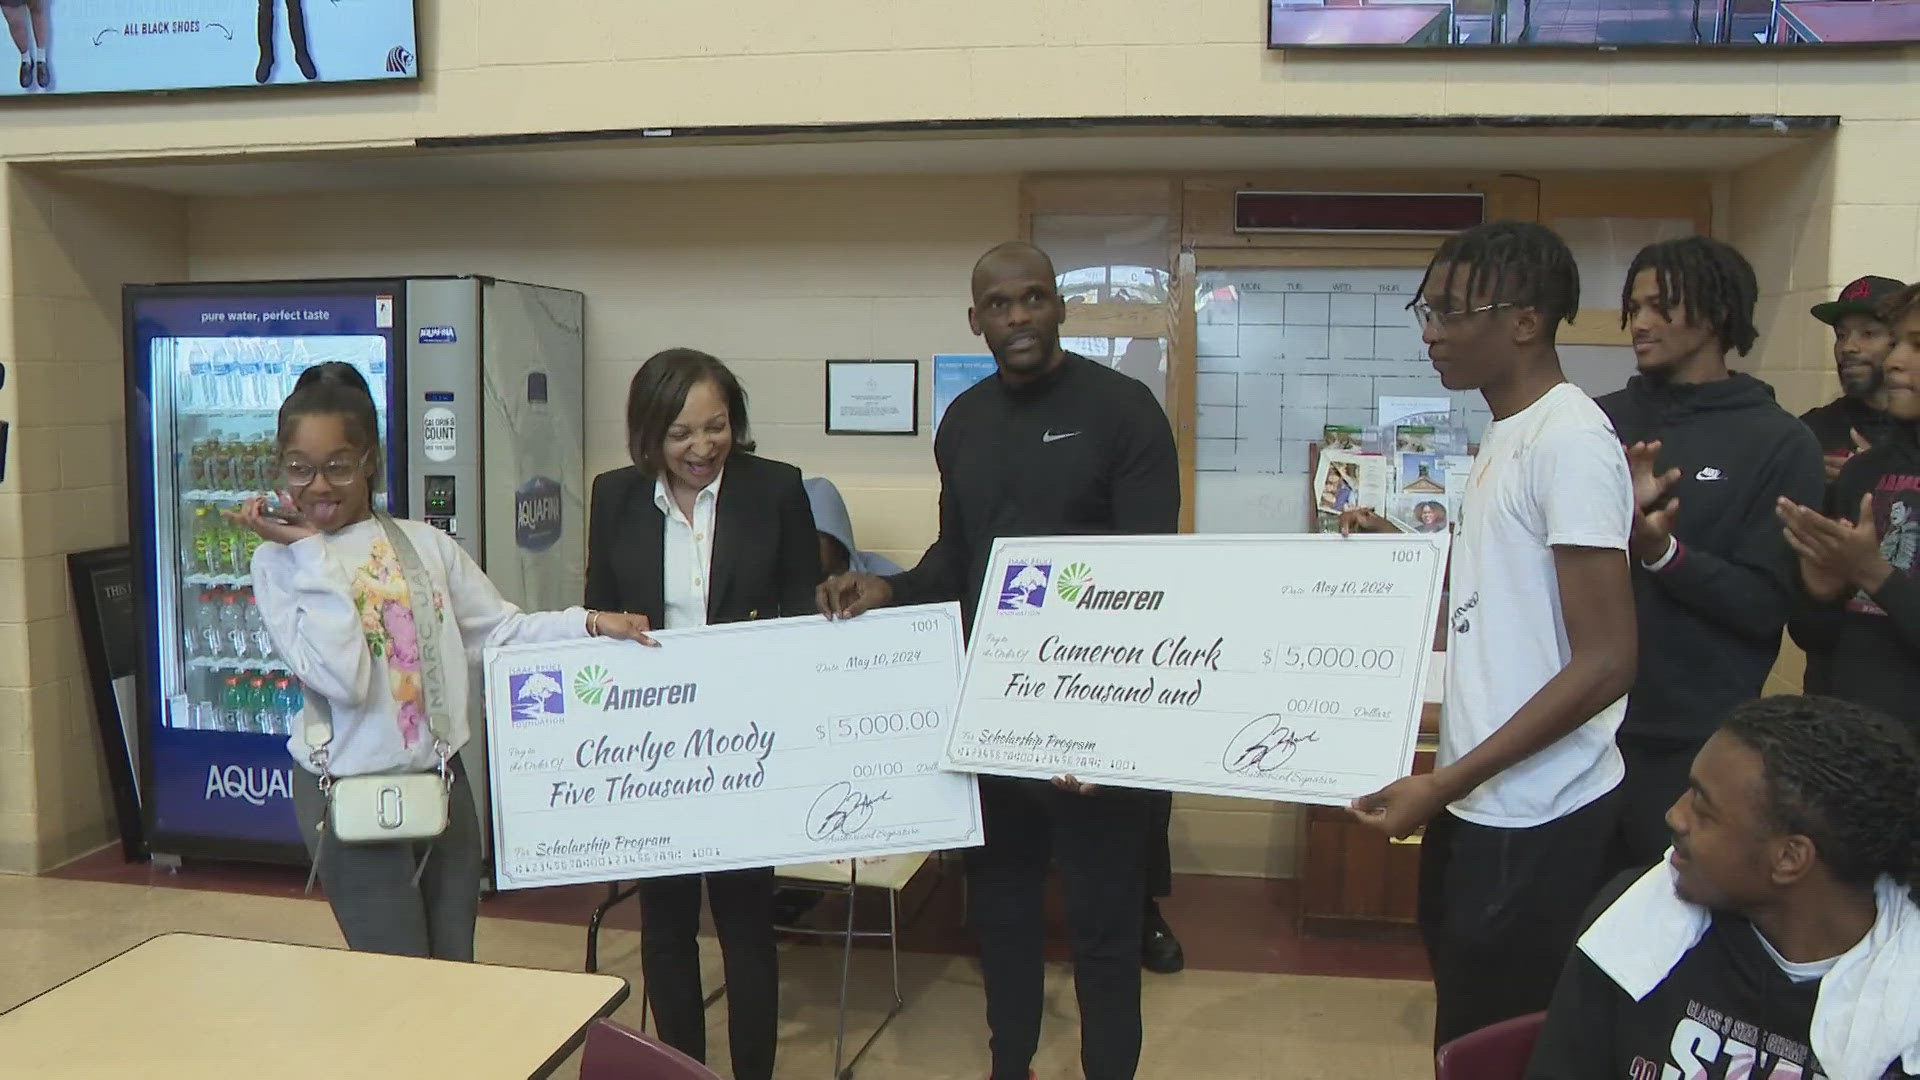 Isaac Bruce and Ameren presented scholarships to two students at Cardinal Ritter College Prep Friday. He hopes the program inspires recipients to pay it forward.